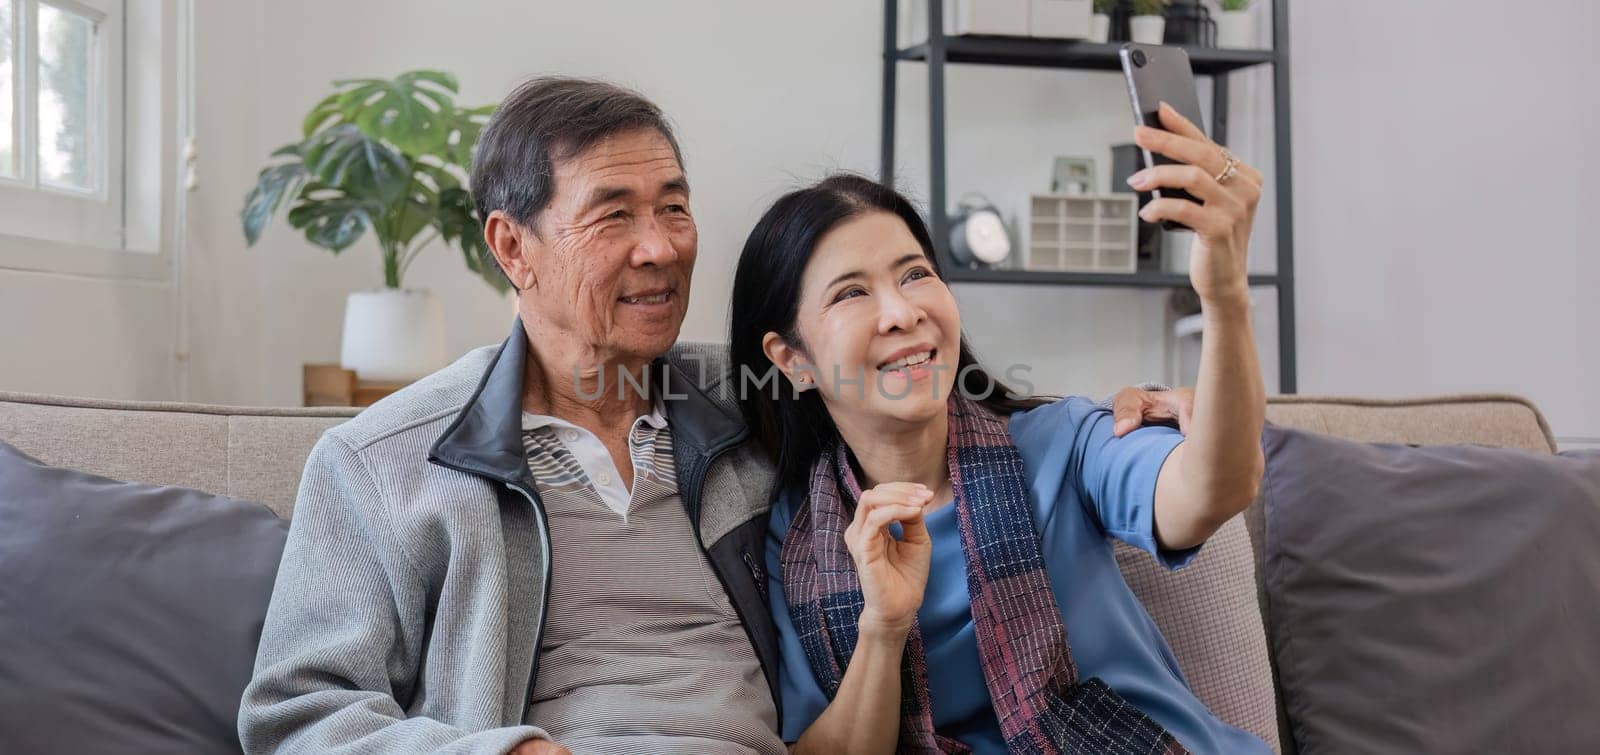 Senior couple in their 60s video chat greeting each other on vacation Have fun together on the sofa in the living room..